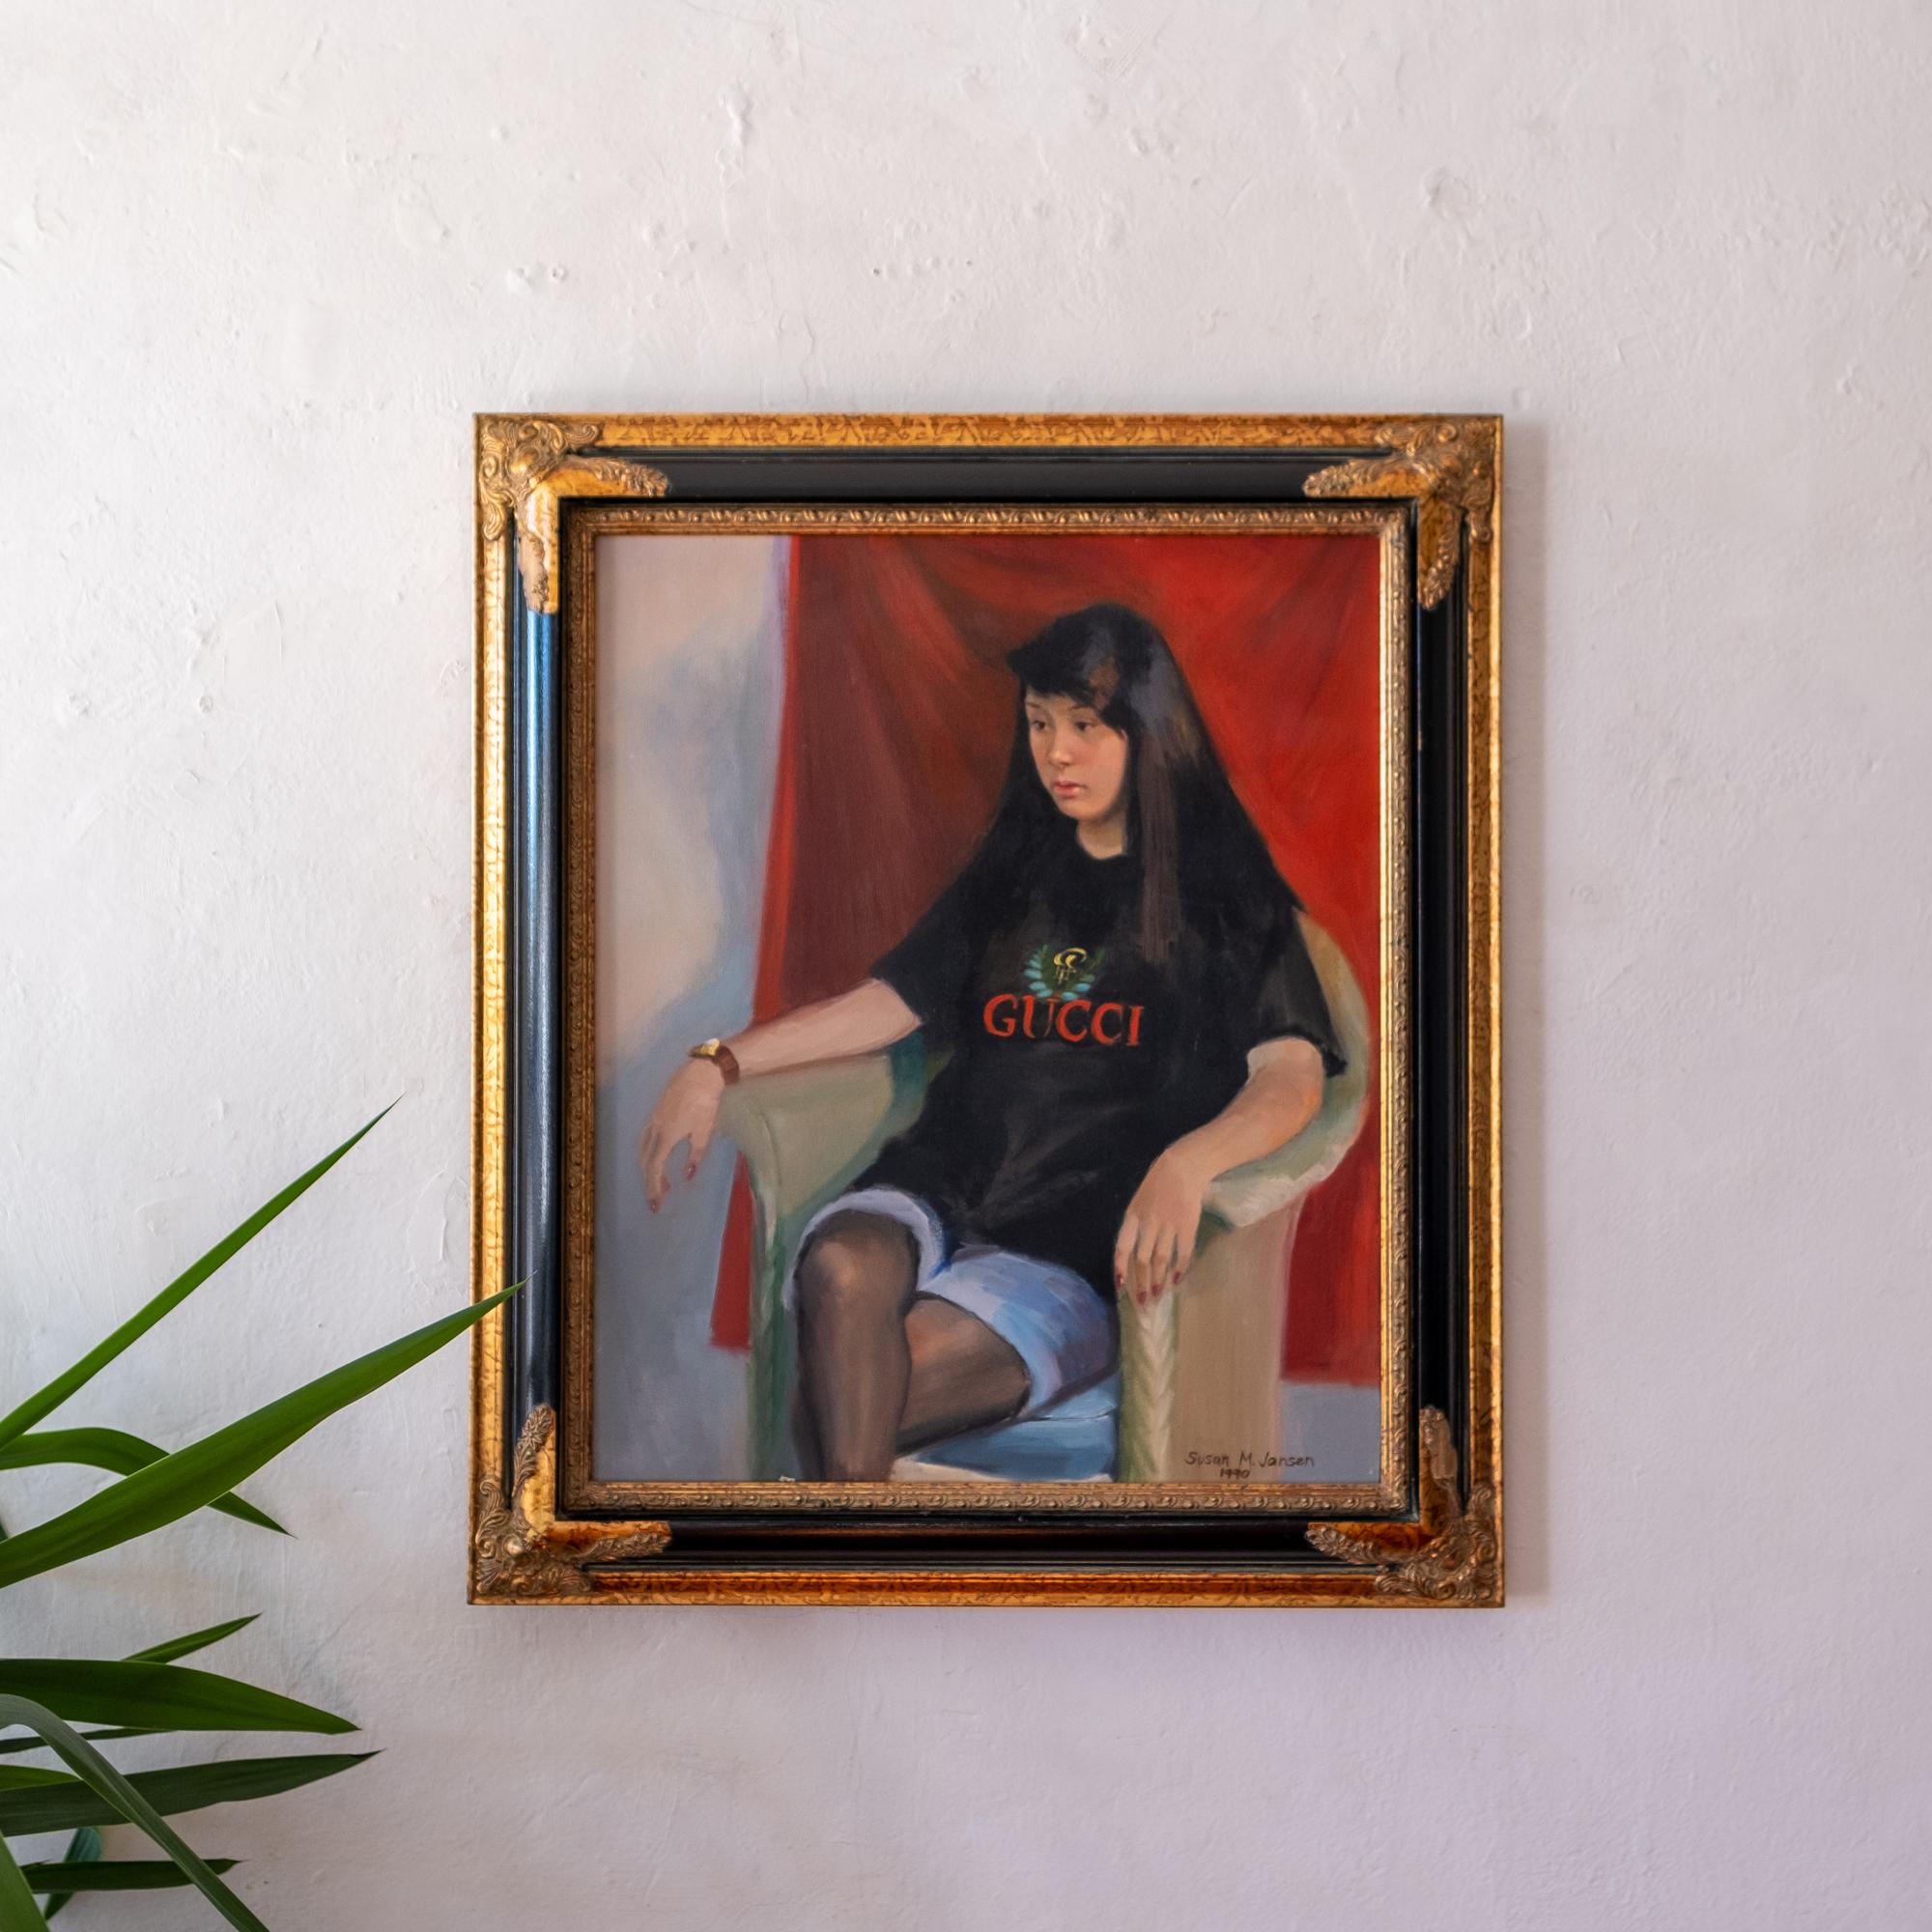 Compelling amateur painting of a misanthropic teenage girl wearing a Gucci t-shirt. The ostentatious gilded frame (Made in Mexico) only adds to the charm. Signed and dated, 1990.